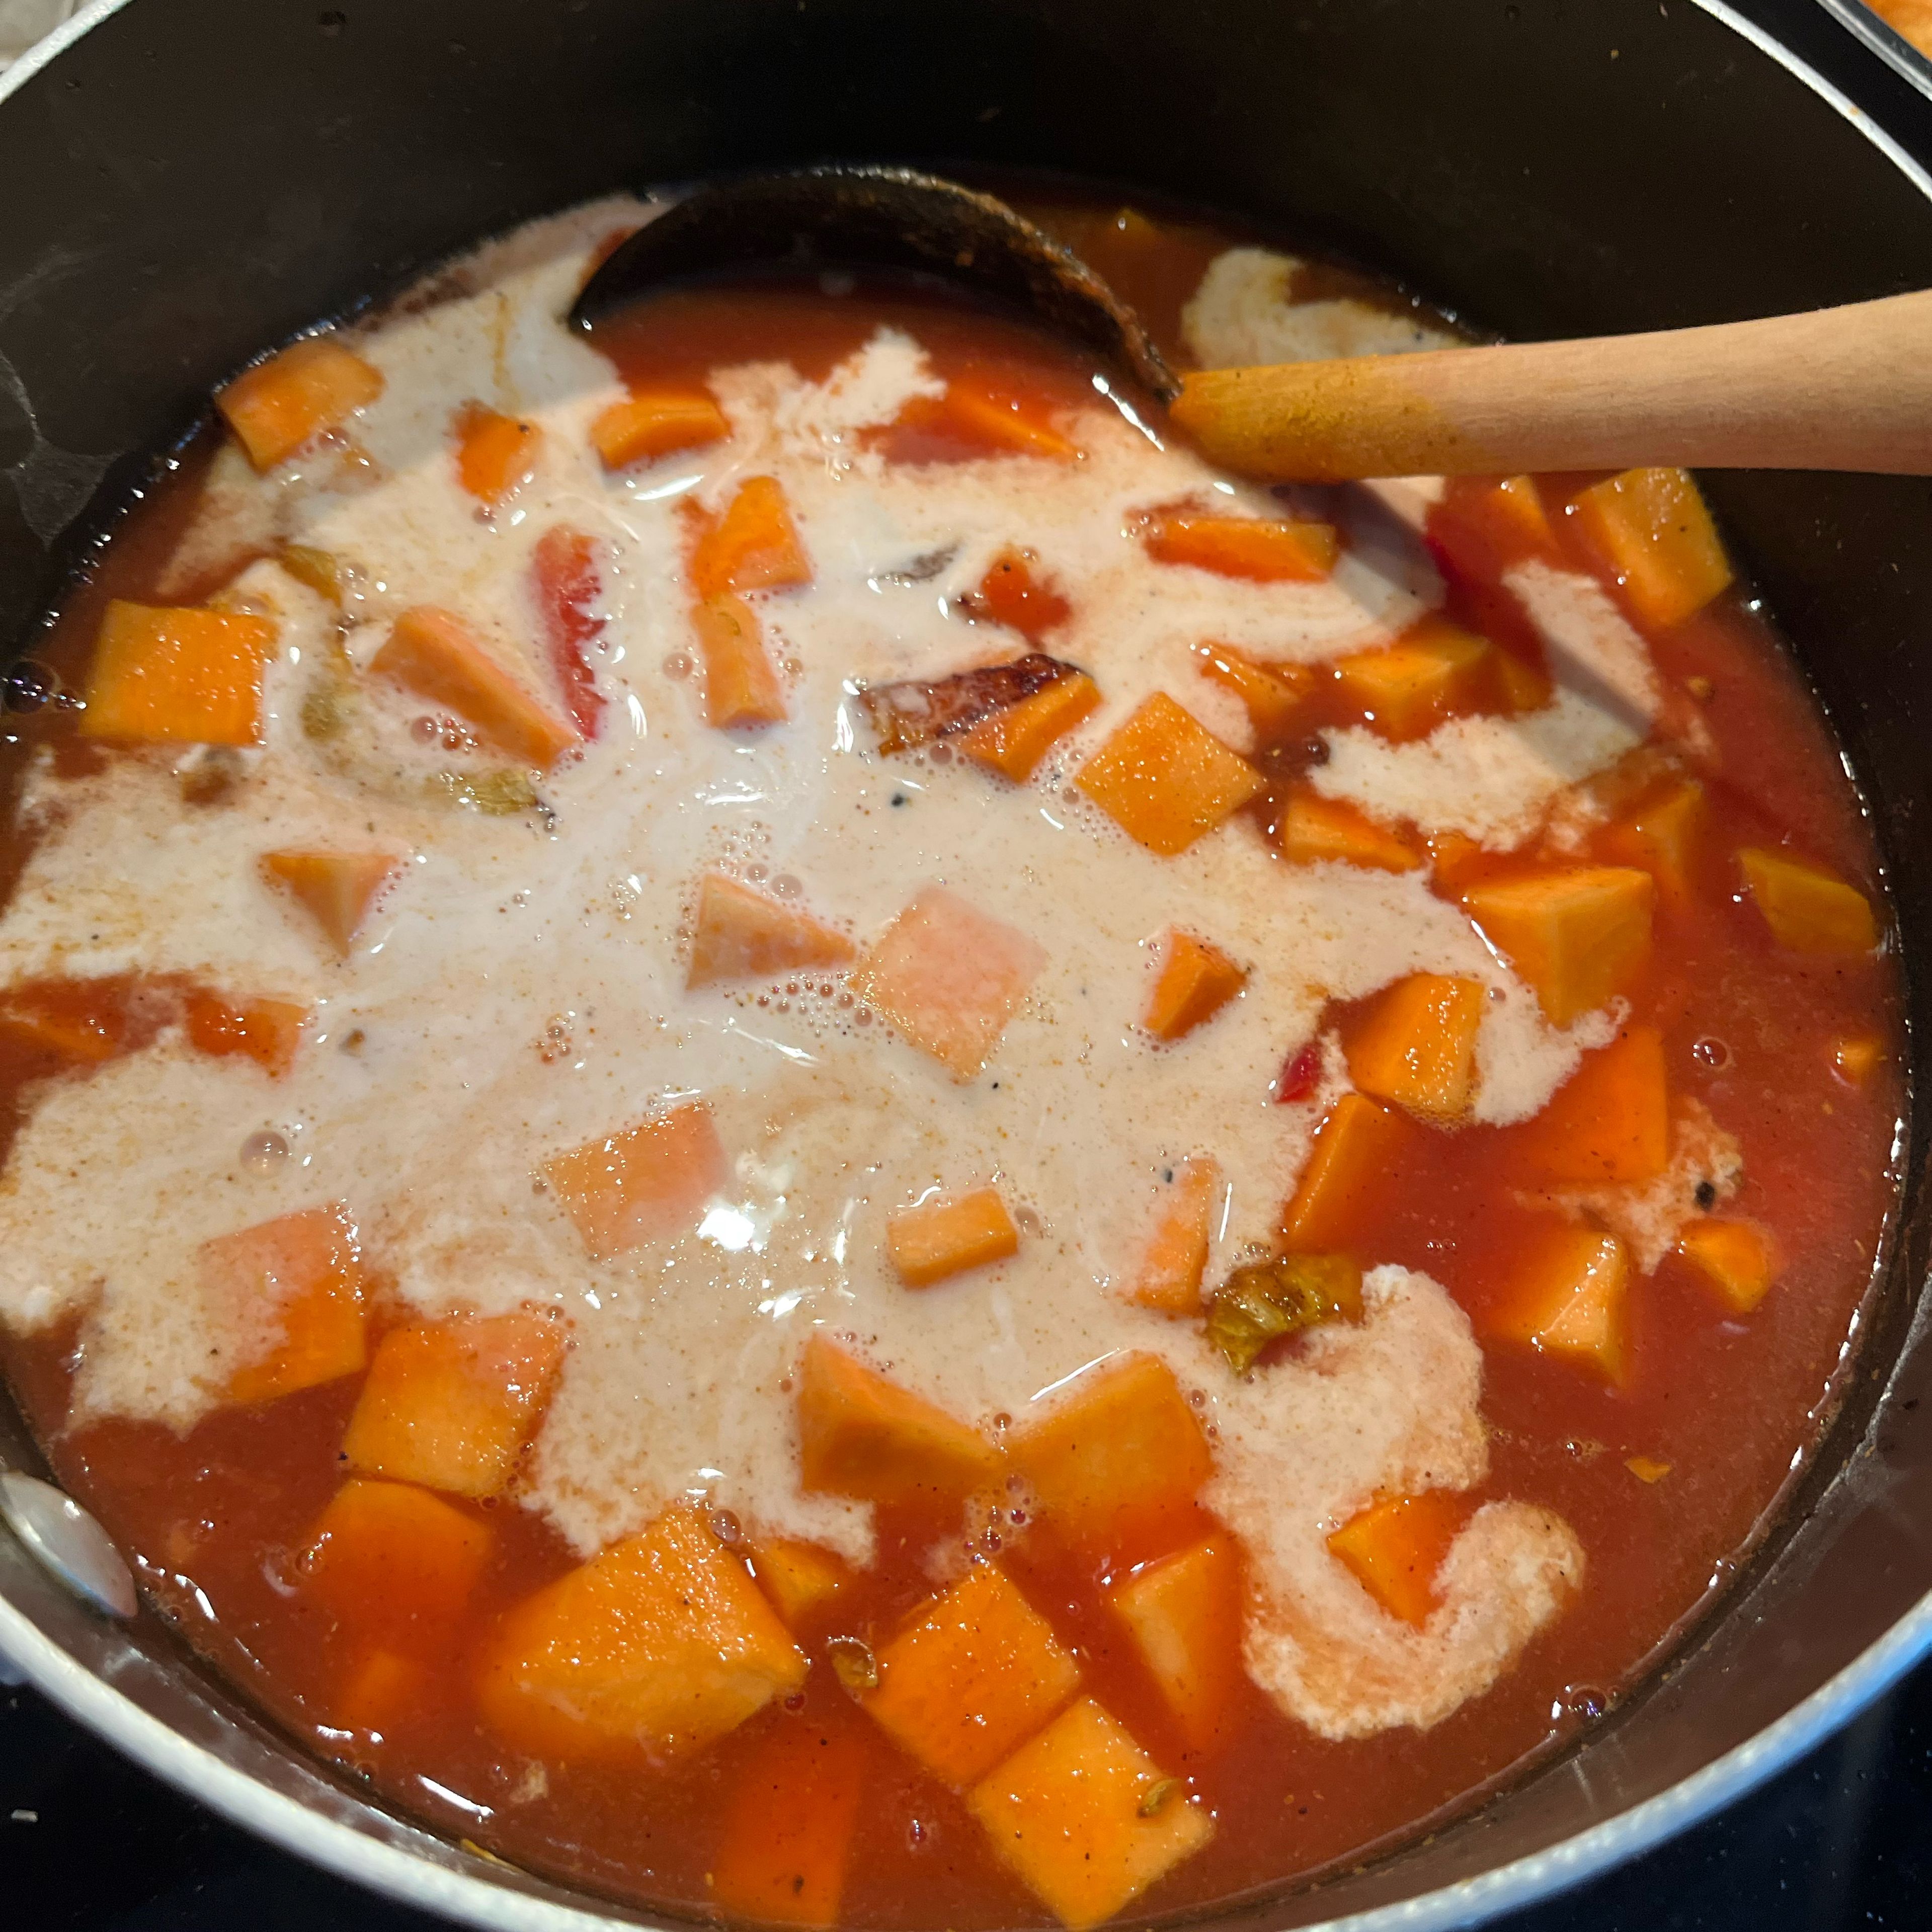 Add sweet potato, red lentils, tomato purée and coconut milk and bring to a boil. Simmer on medium heat for about 20mins till the sweet potato is soft.